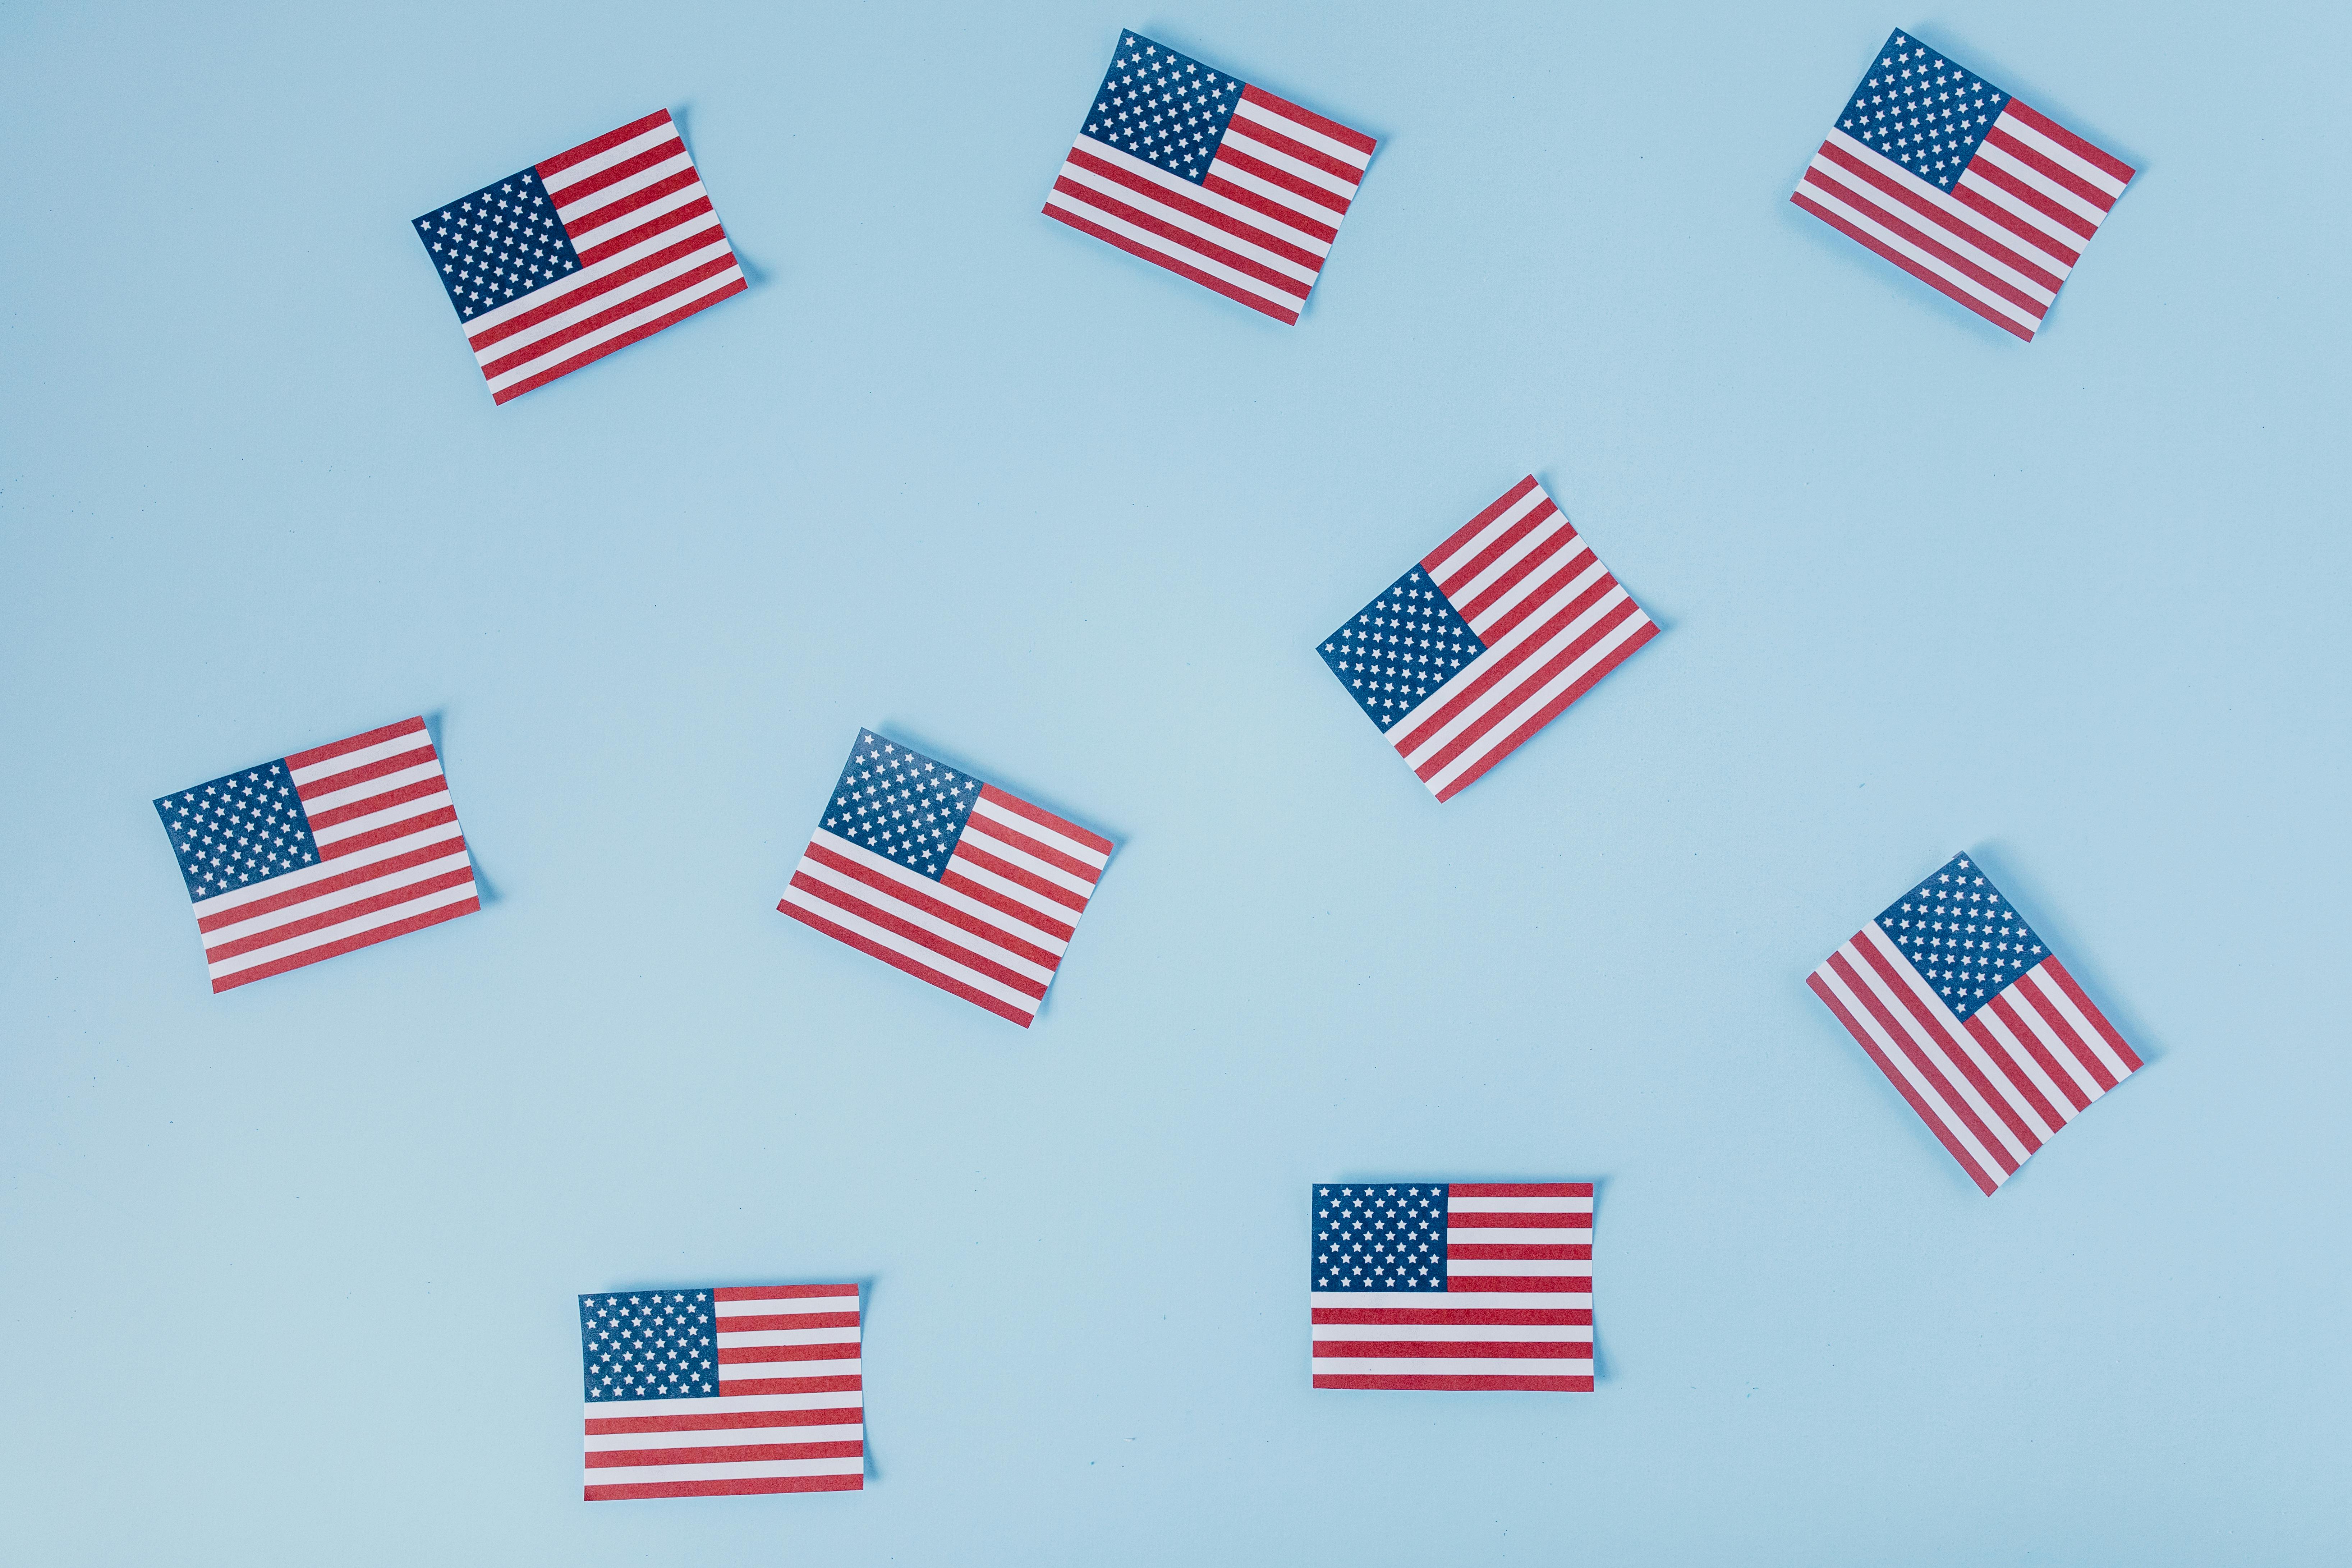 Small American flags laid out on a light blue background. 